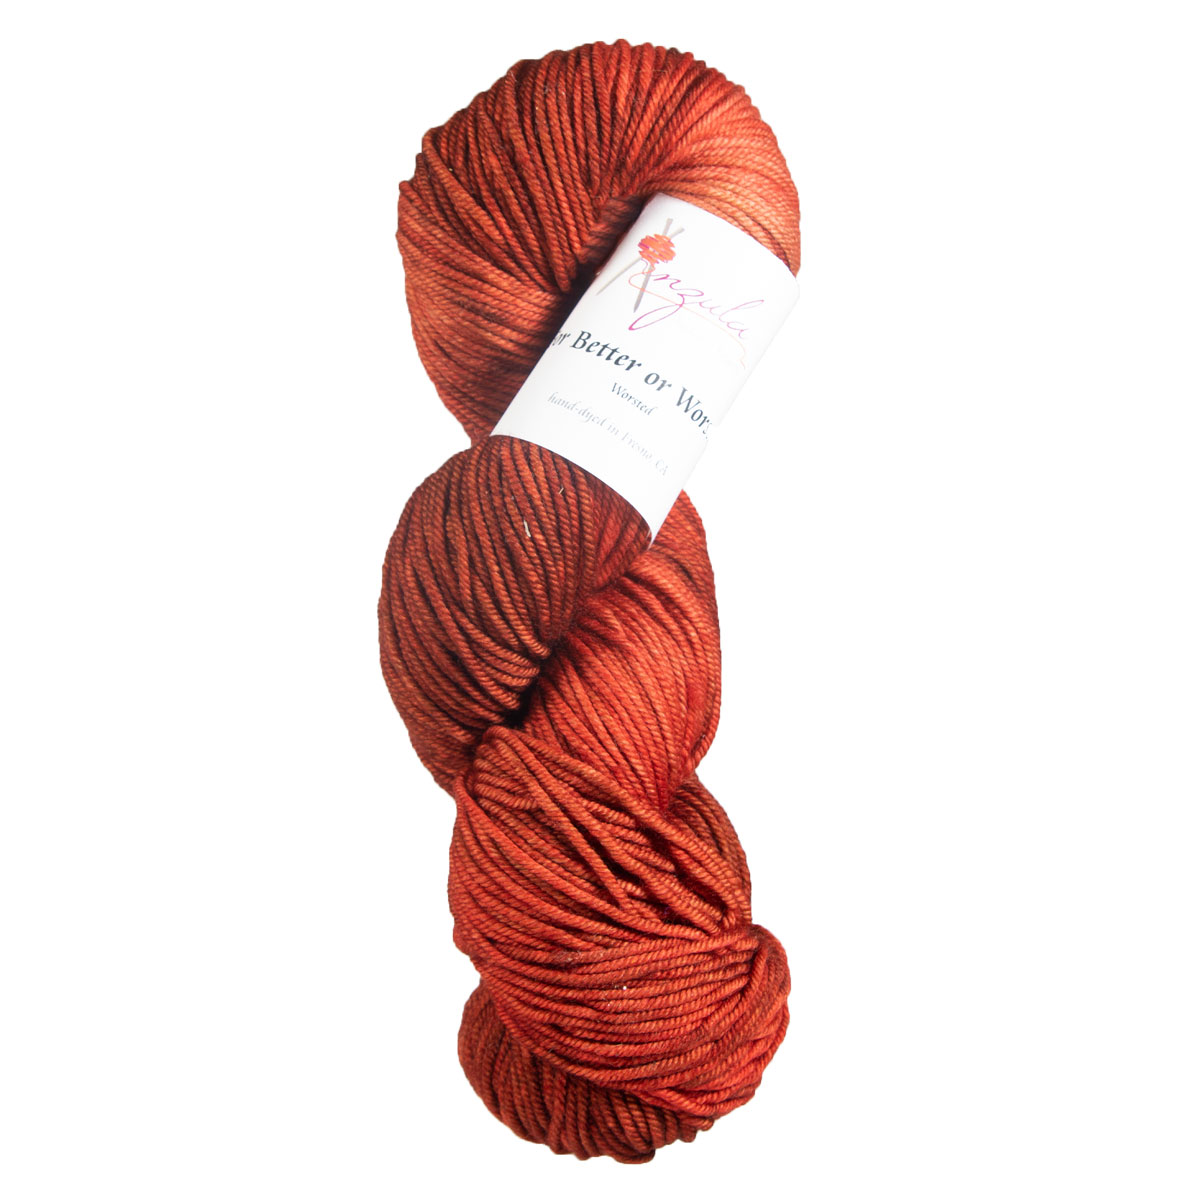 Anzula For Better or Worsted Yarn - Cedar at Jimmy Beans Wool